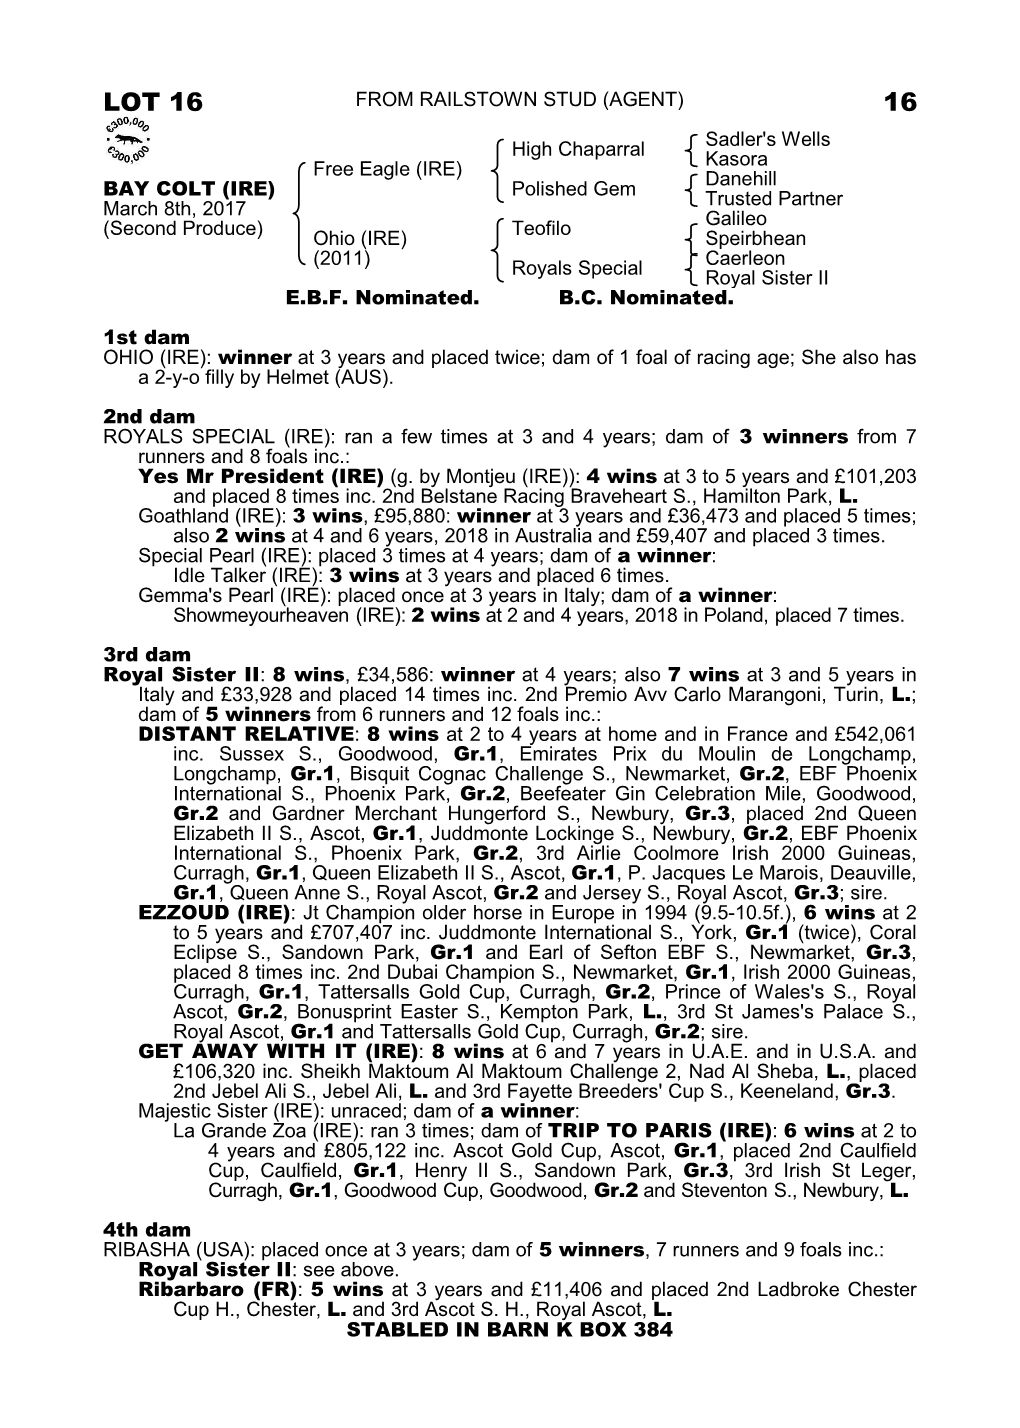 Lot 16 from Railstown Stud (Agent) 16